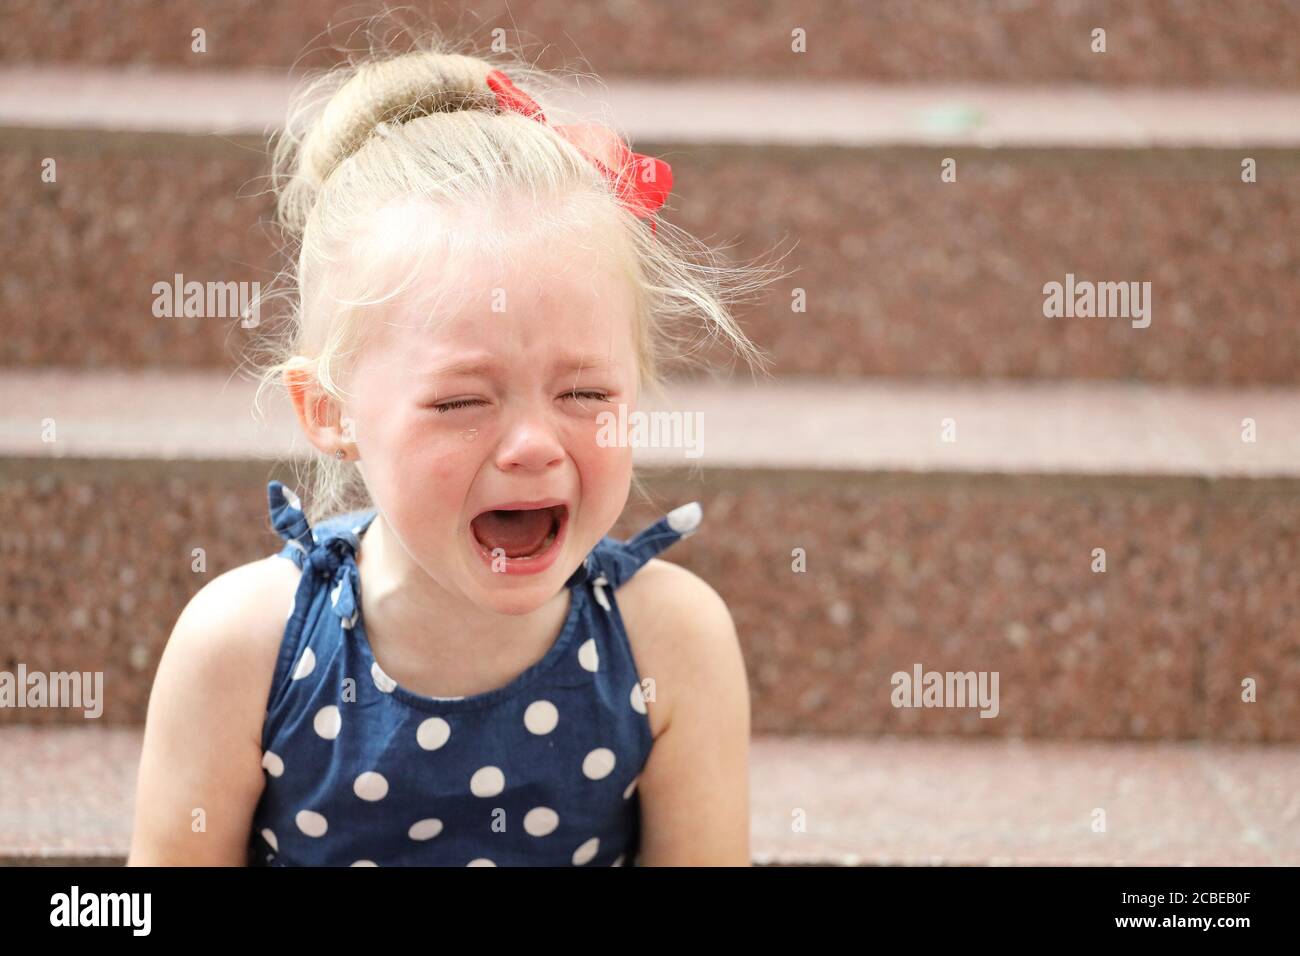 Young Girl Cries In Pain Immagini e Fotos Stock - Alamy